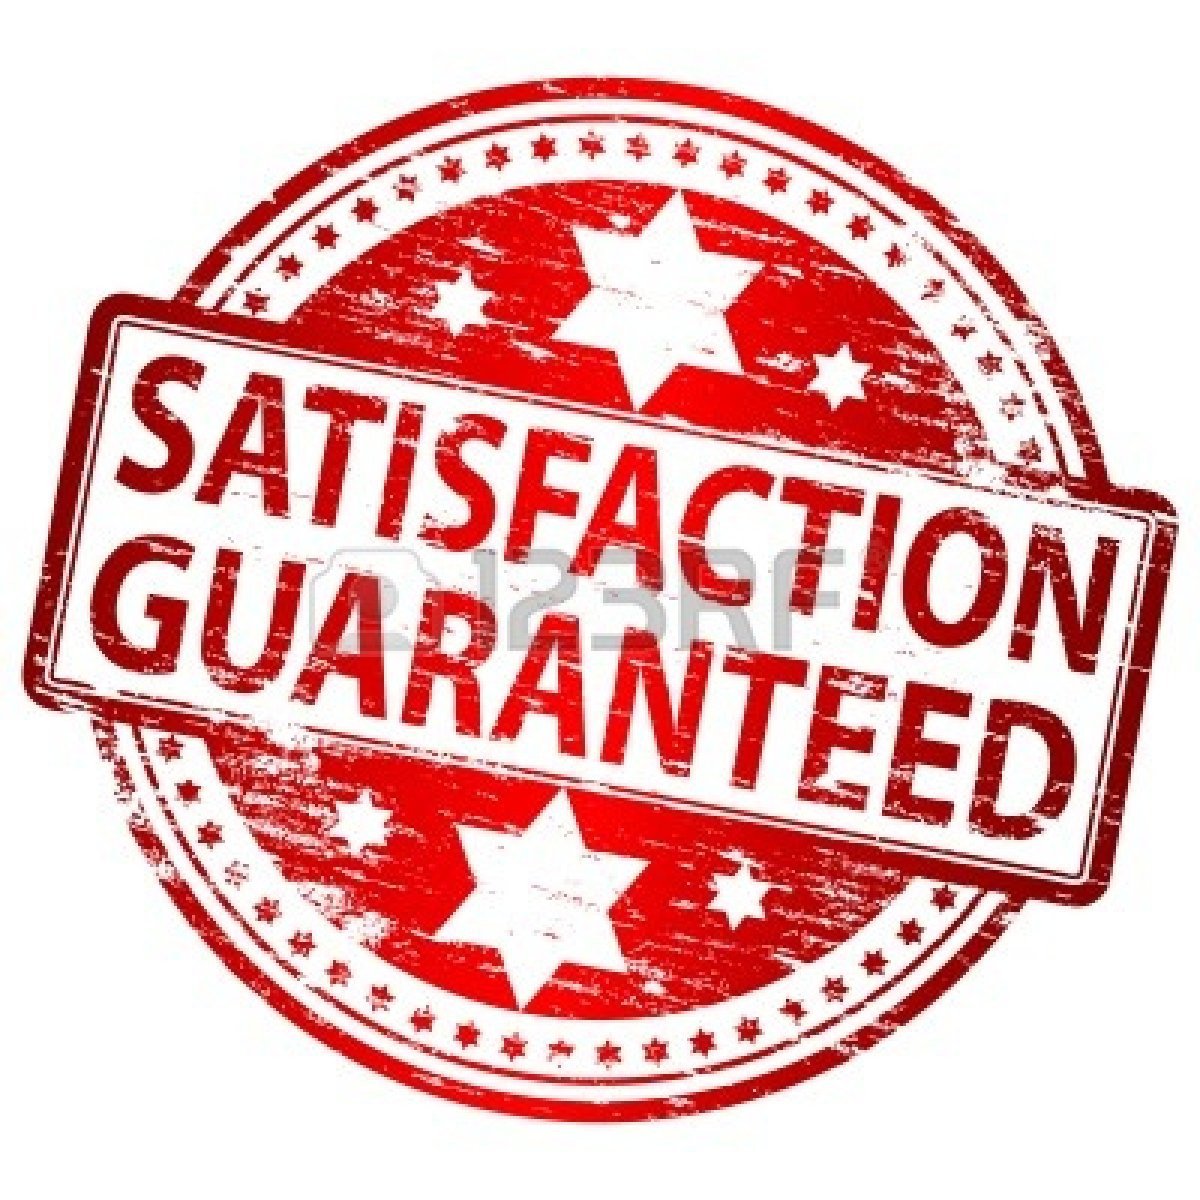 8986328 satisfaction guaranteed rubber stamp b0562149 5f8d 46eb af61 b1e555a61d3b